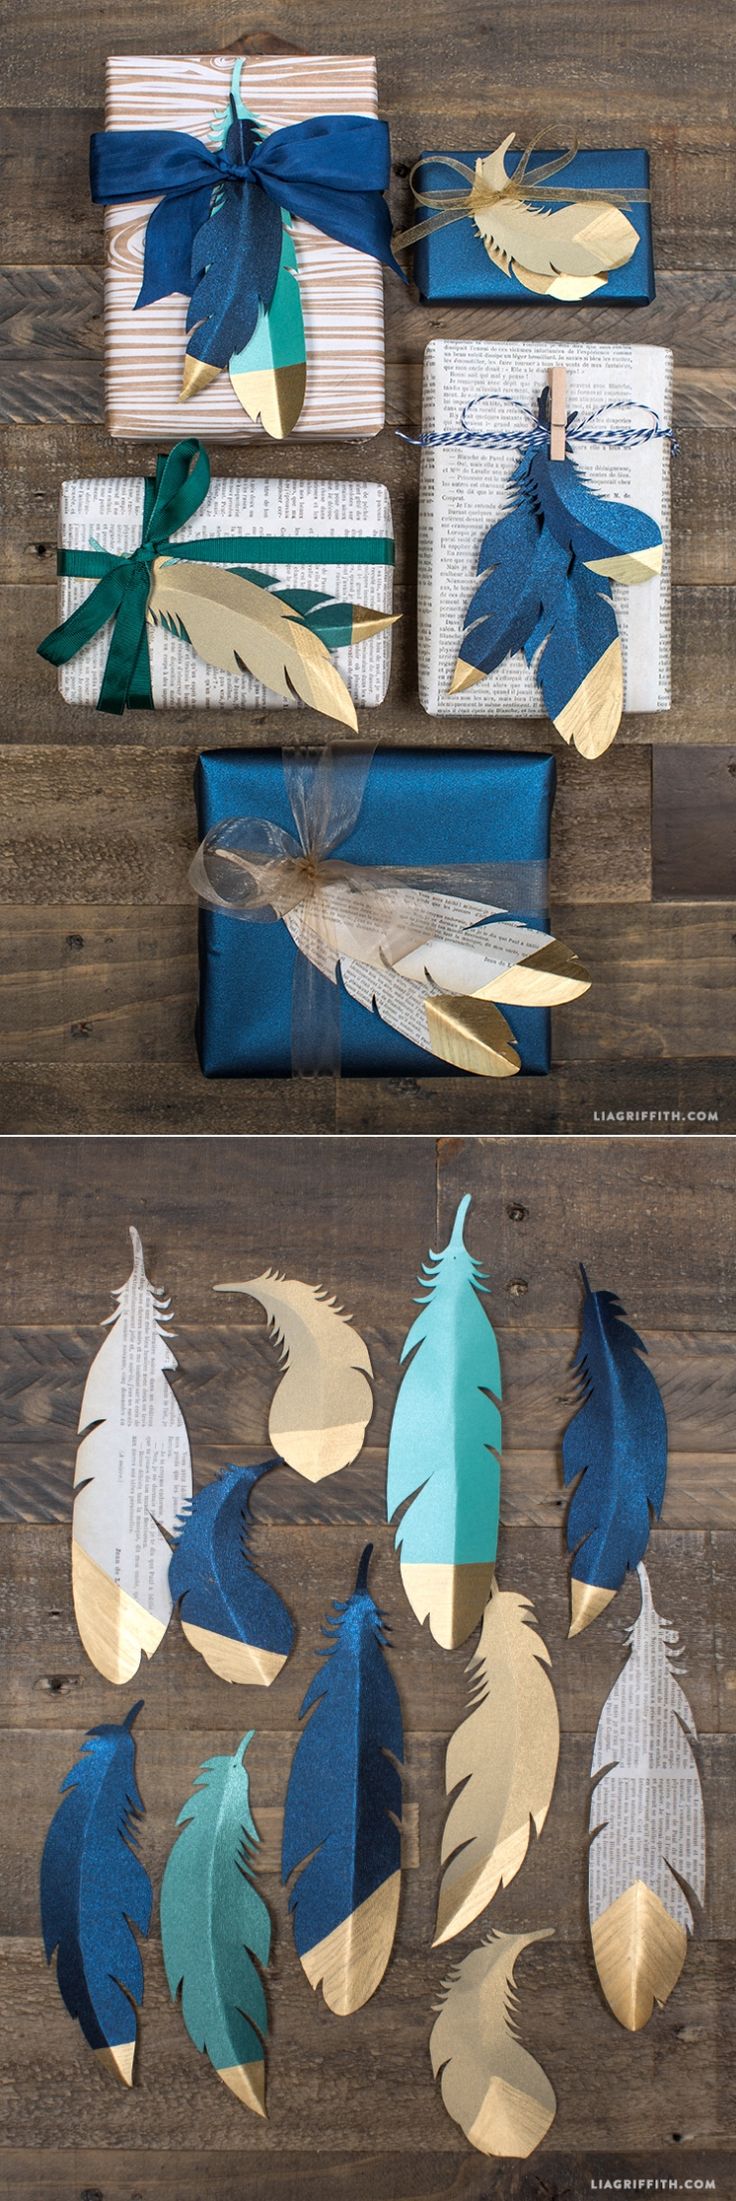 #paperfeathers #goldfeathers #giftwrapping www.LiaGriffith.com